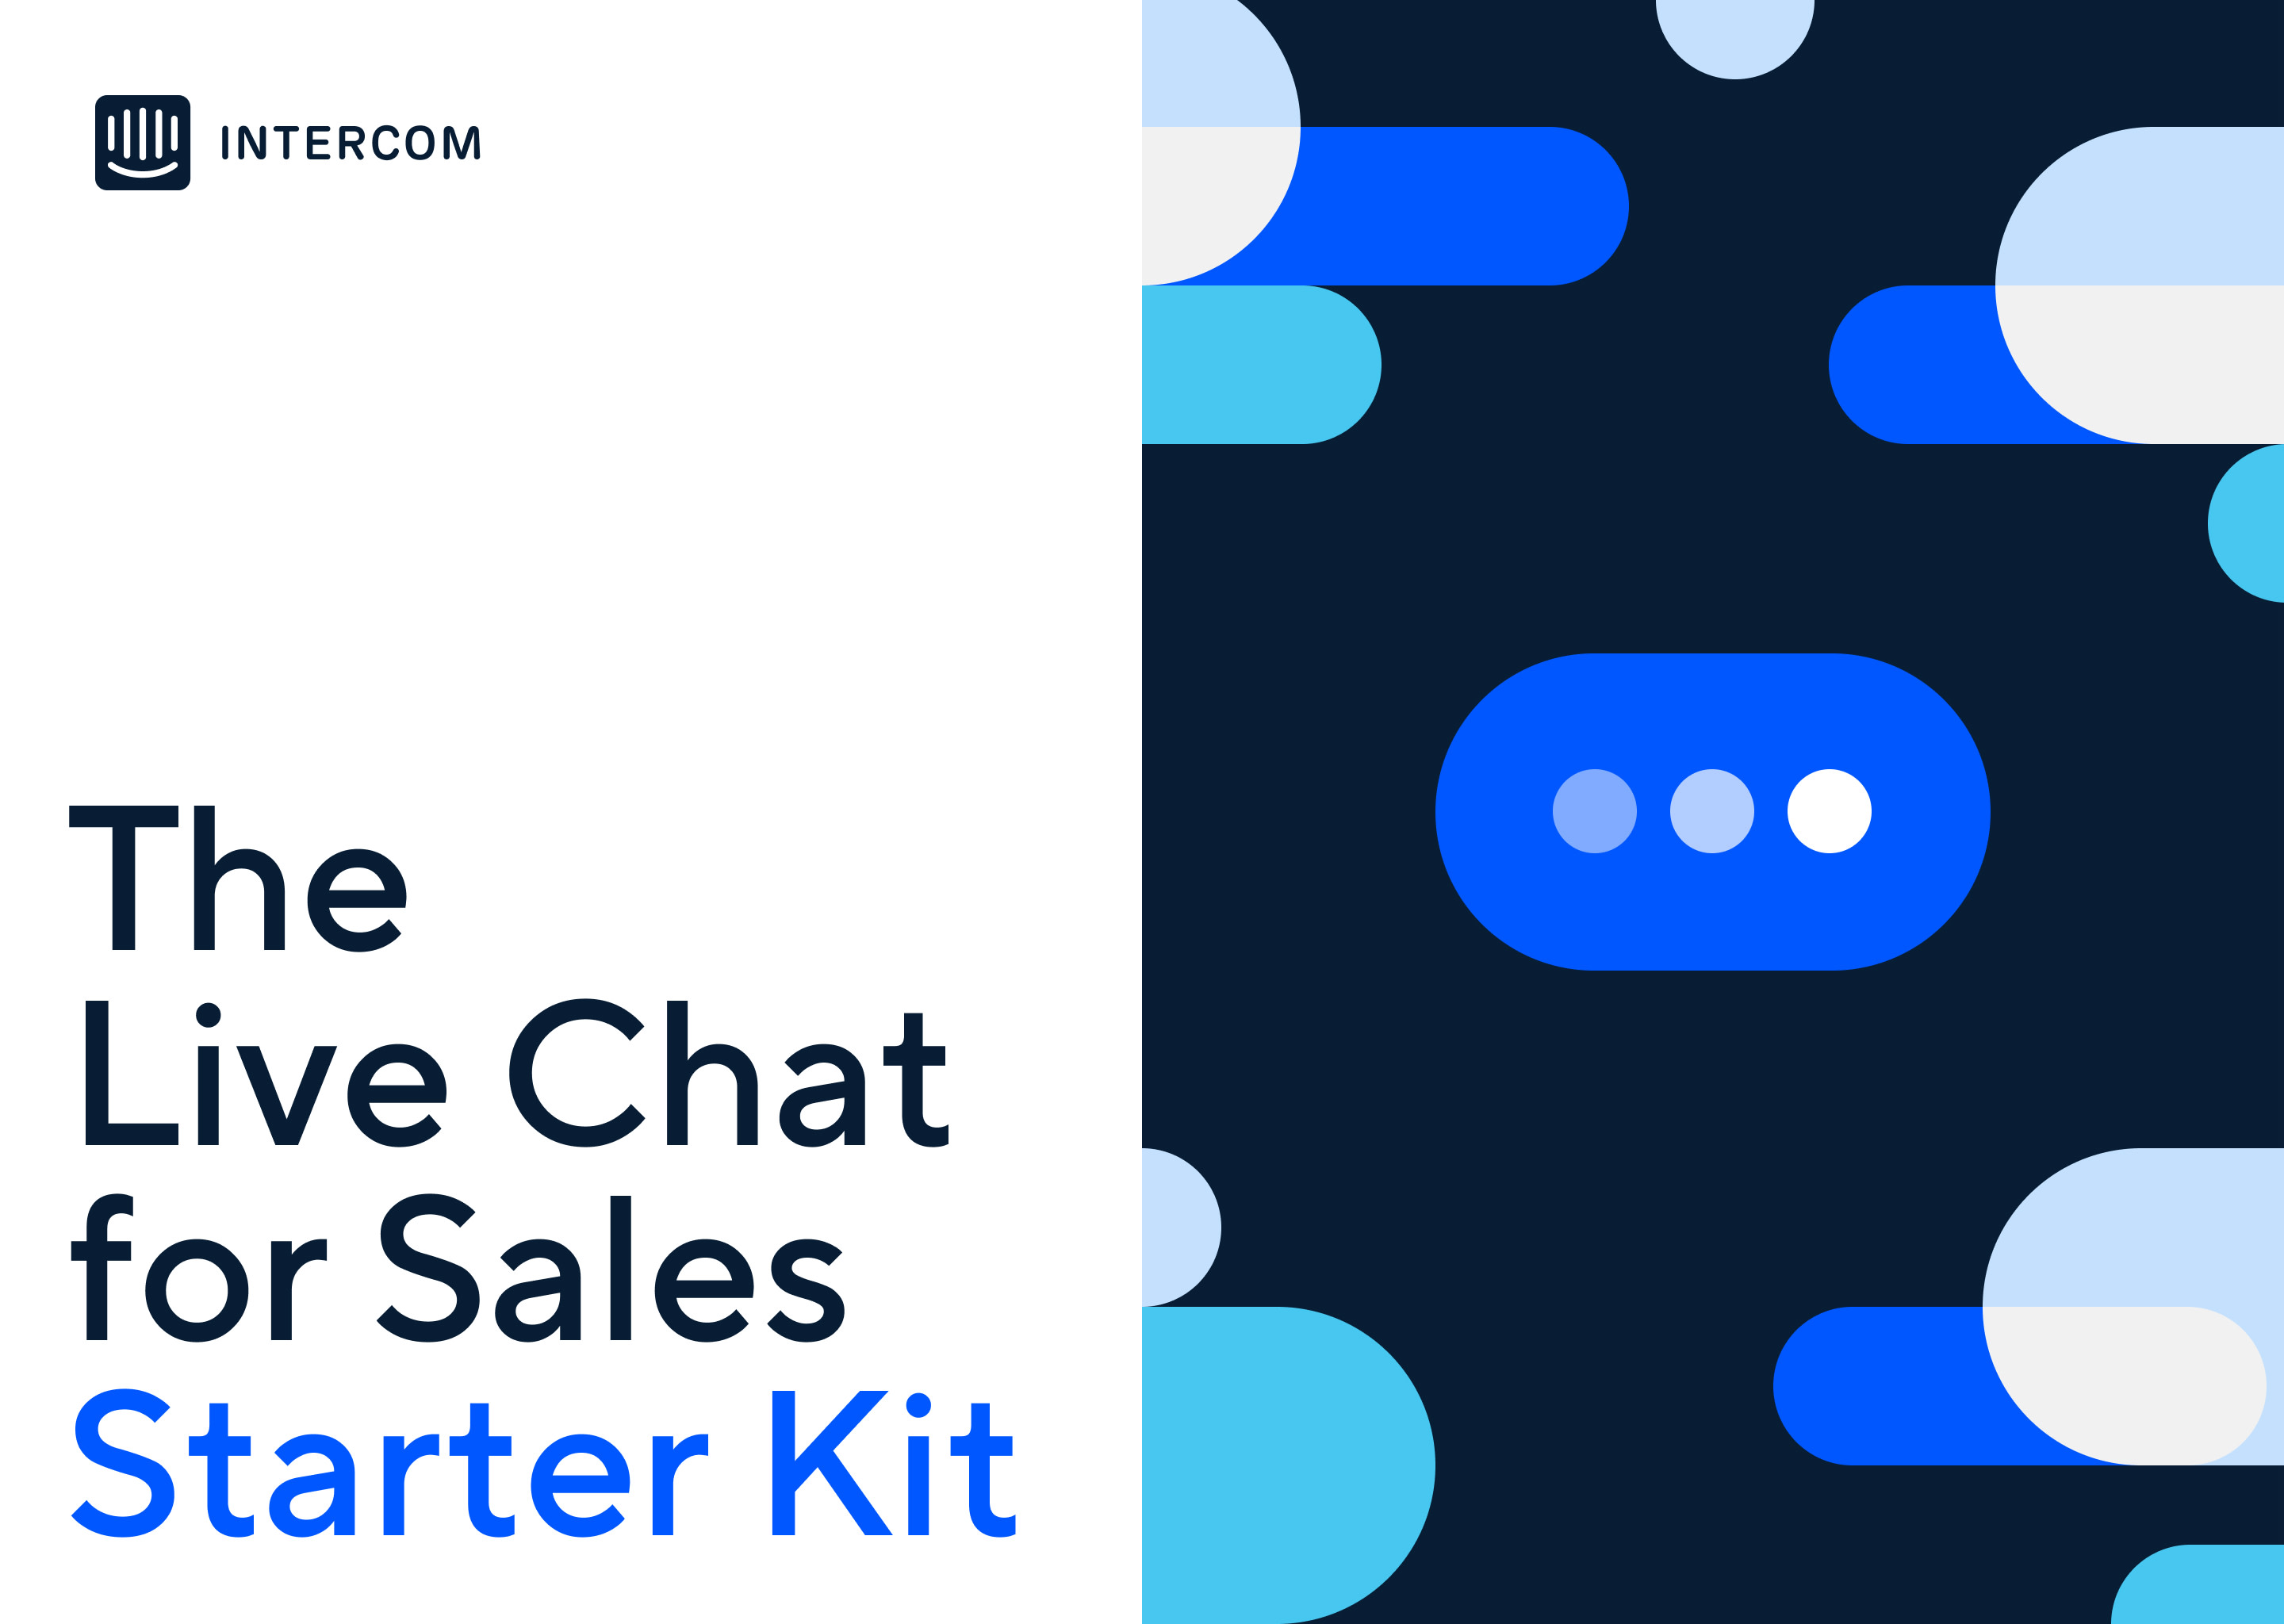 The Live Chat for Sales Starter Kit